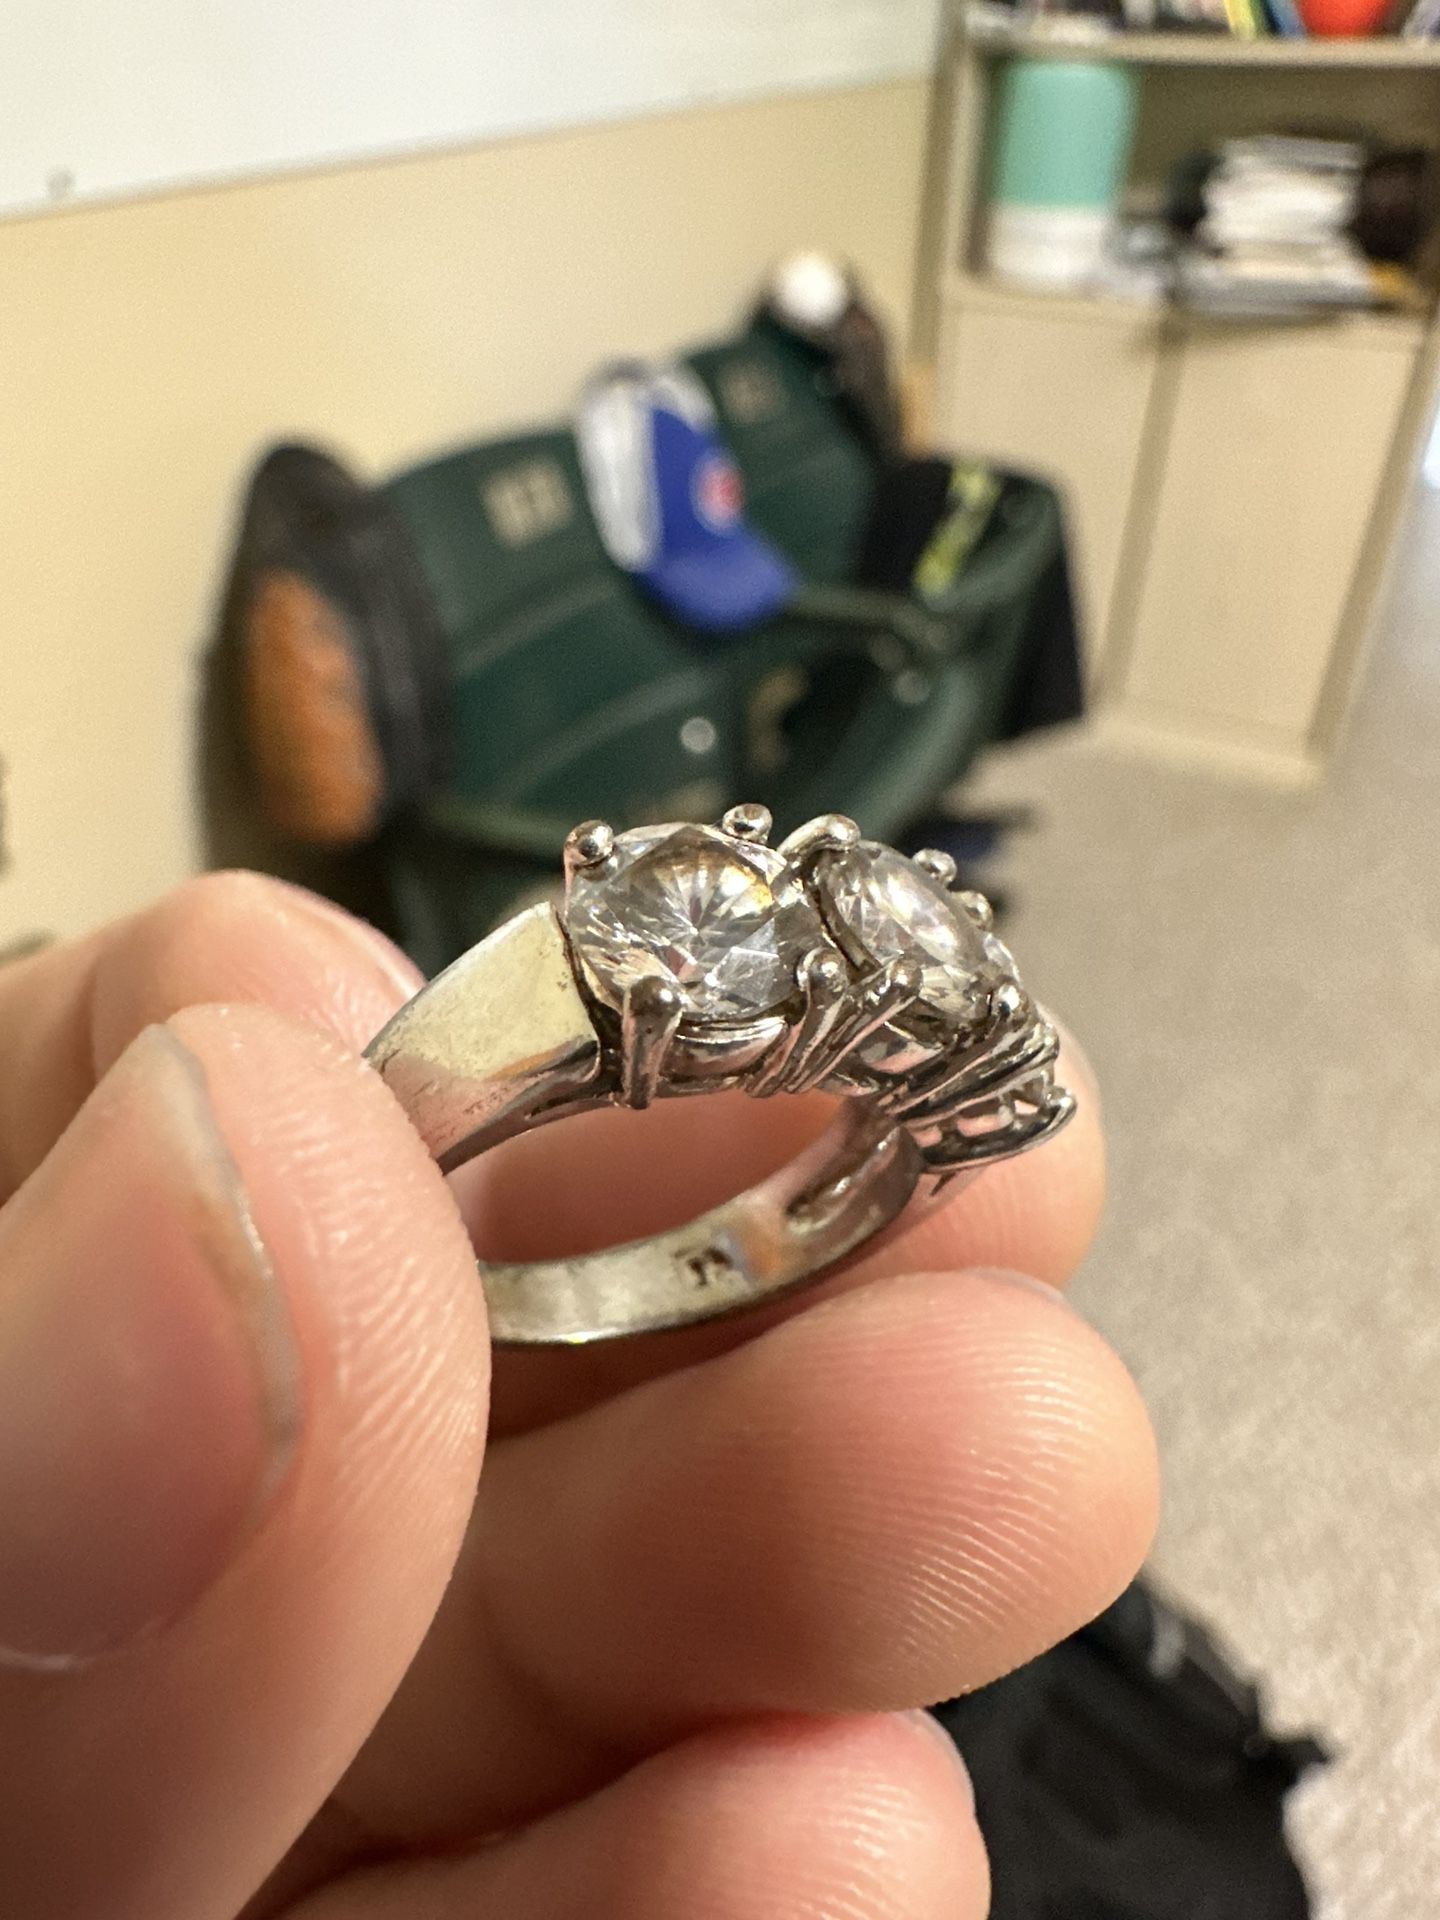 Silver Ring With 3 “Diamonds”